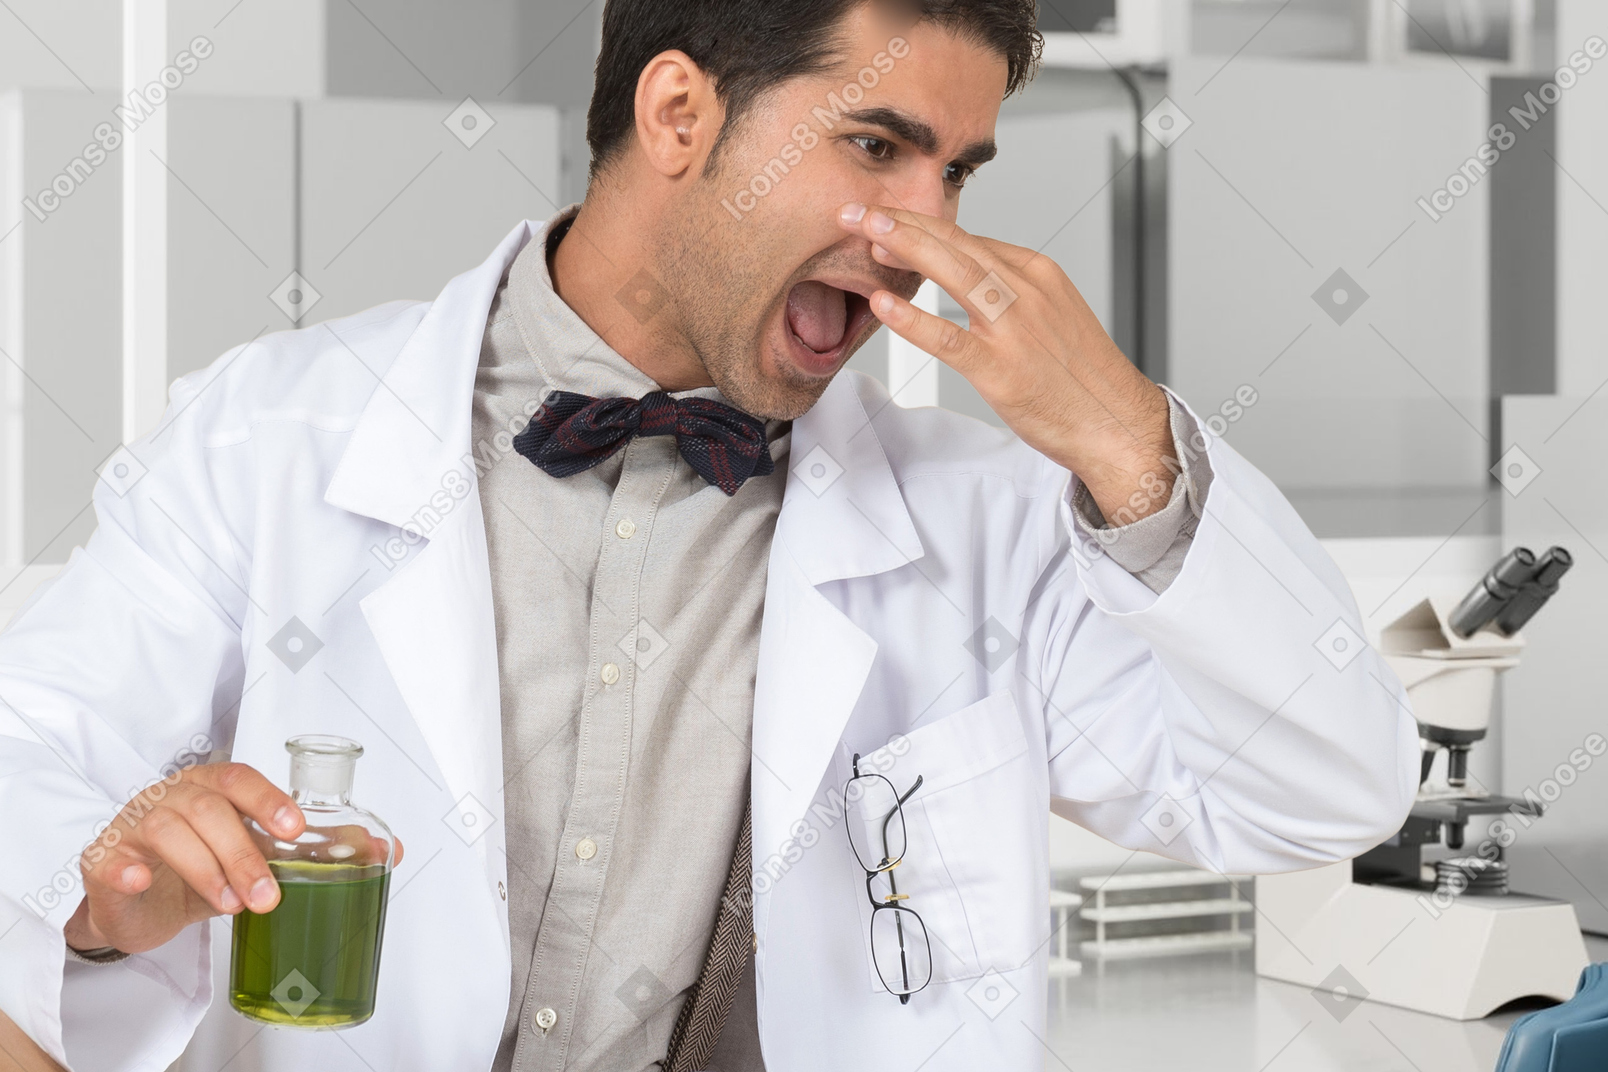 A man in a lab coat holding a glass of green liquid and closing his nose